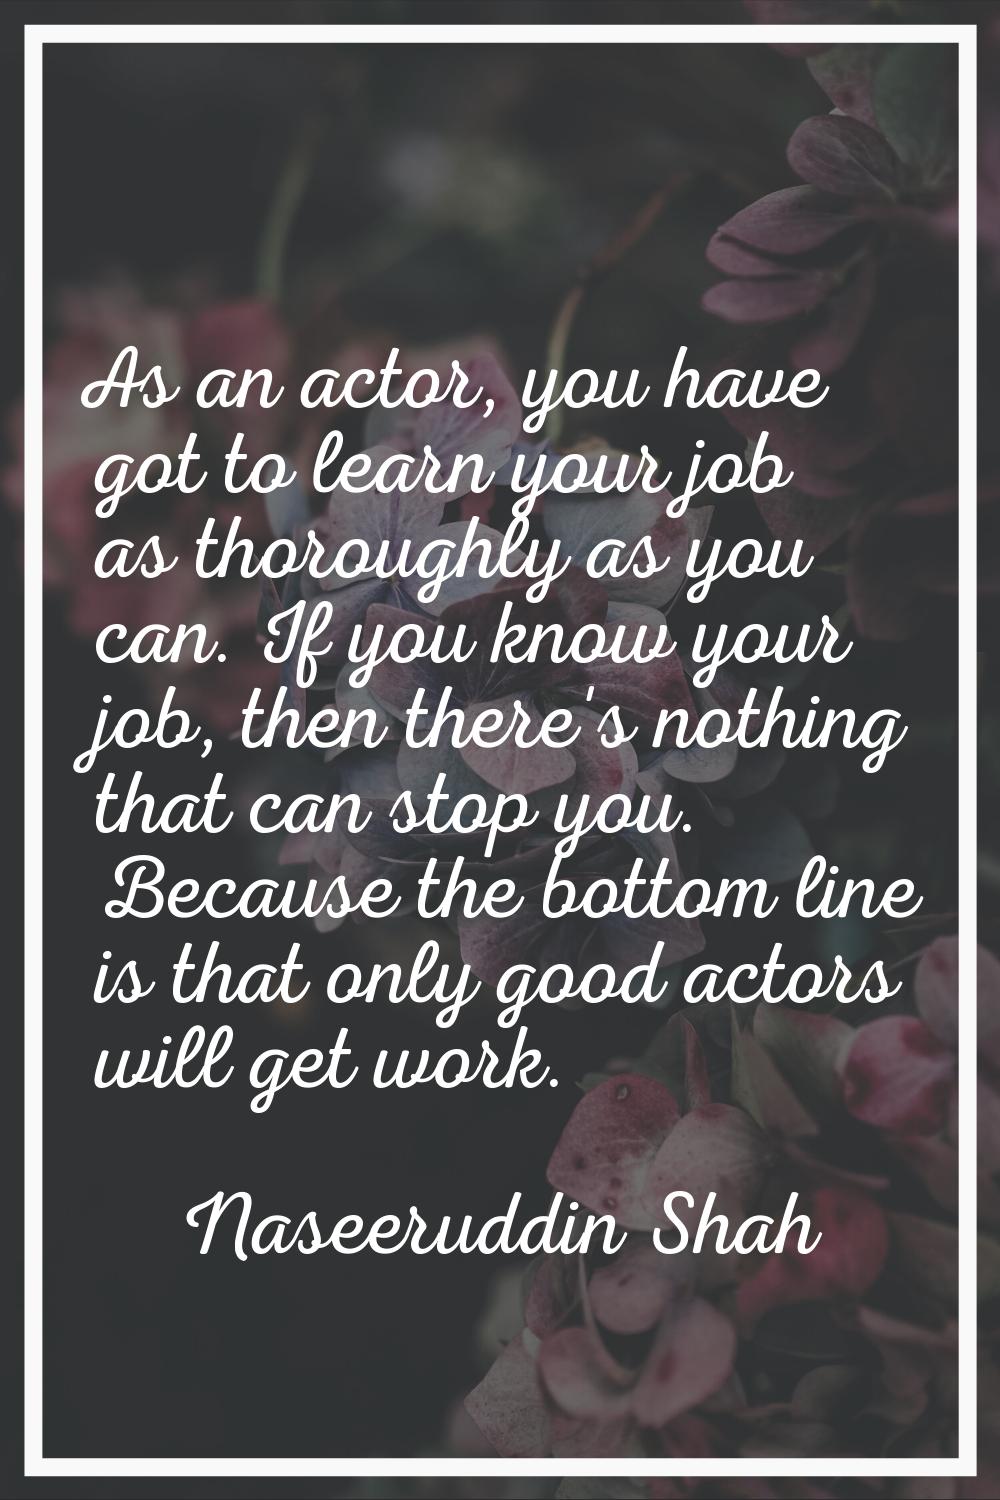 As an actor, you have got to learn your job as thoroughly as you can. If you know your job, then th